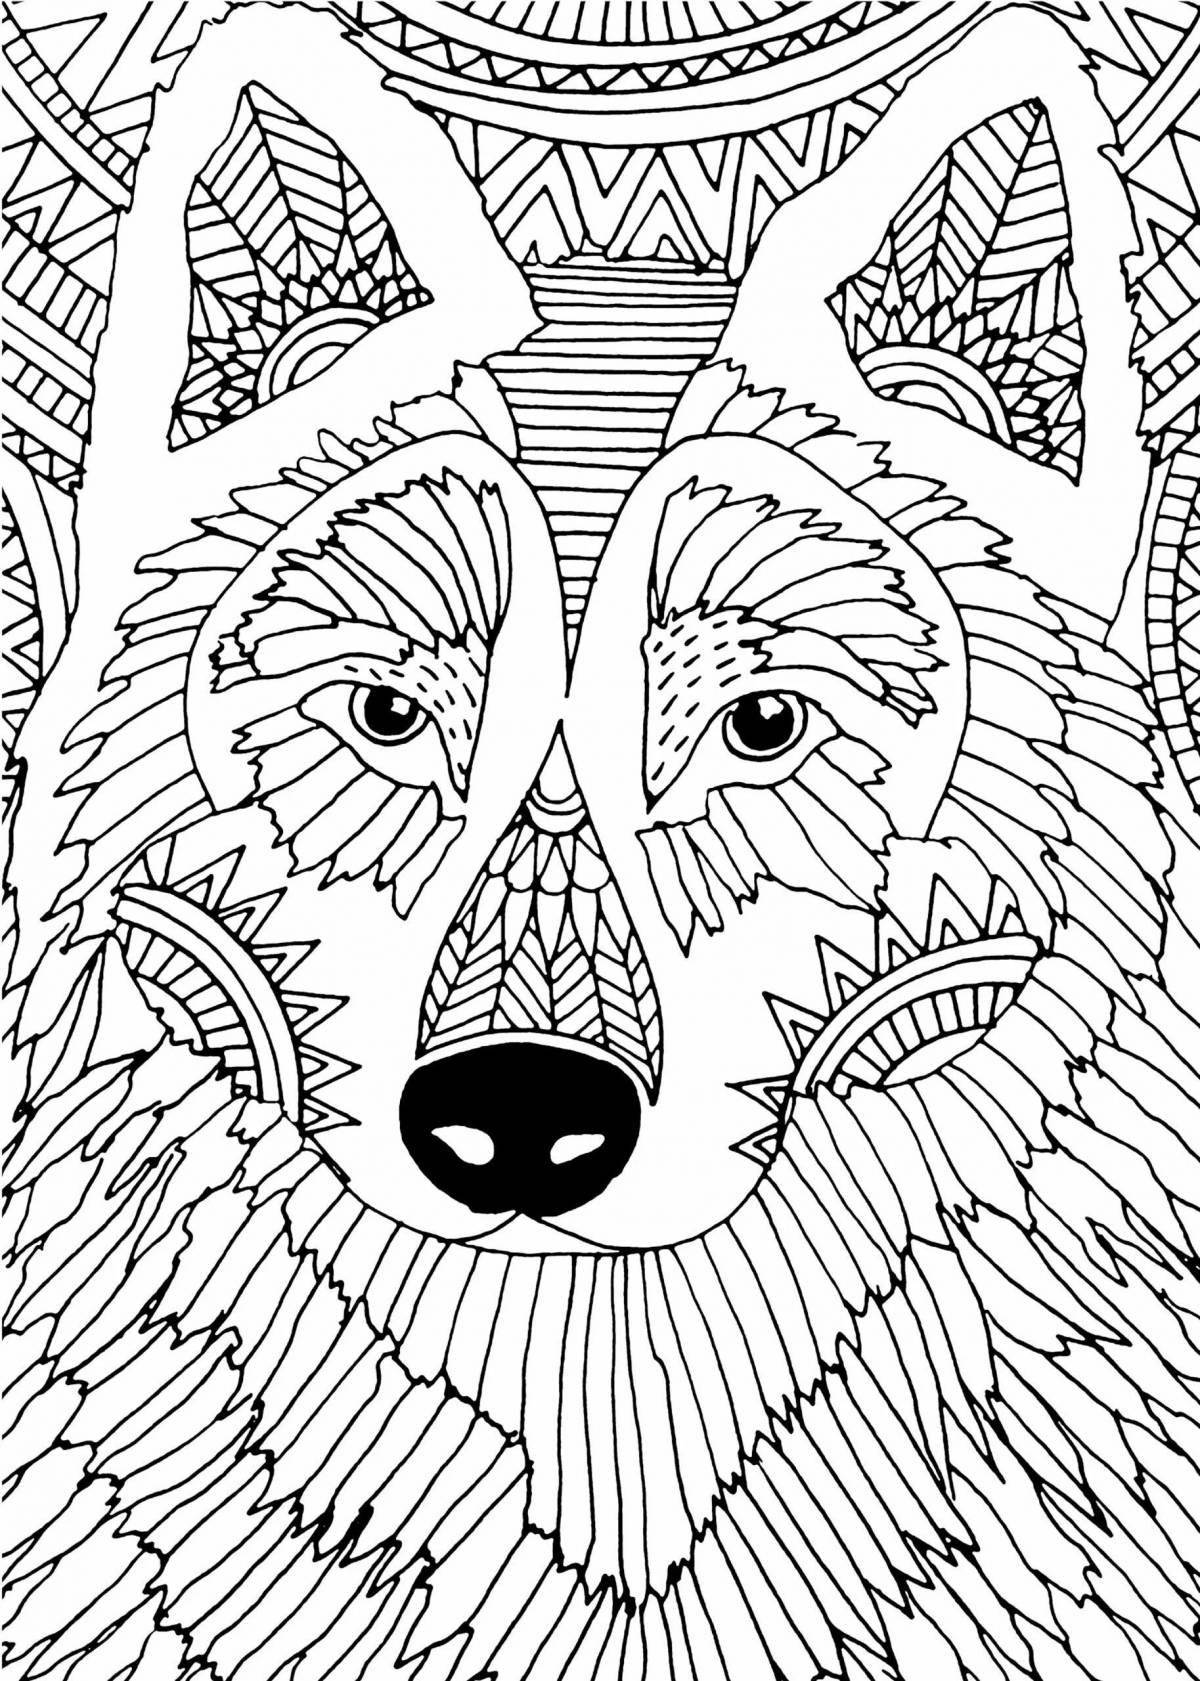 Joyful relaxation coloring book for kids